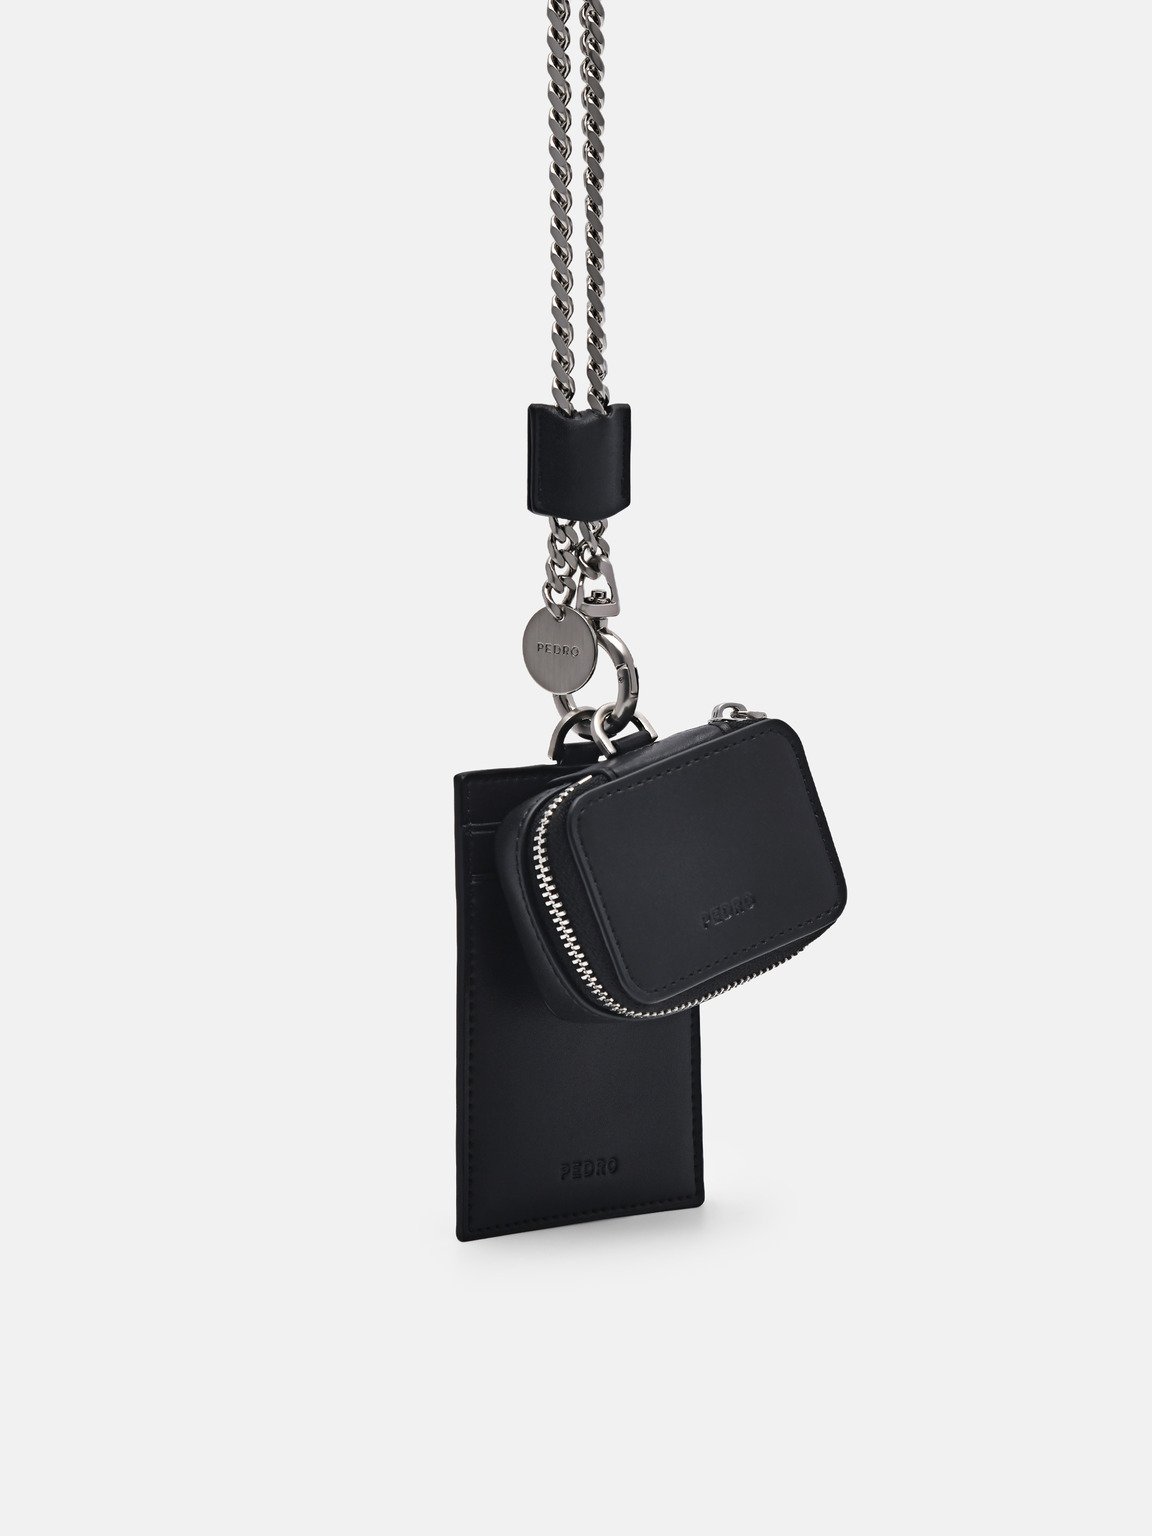 Leather Lanyard with Card Holder, Black